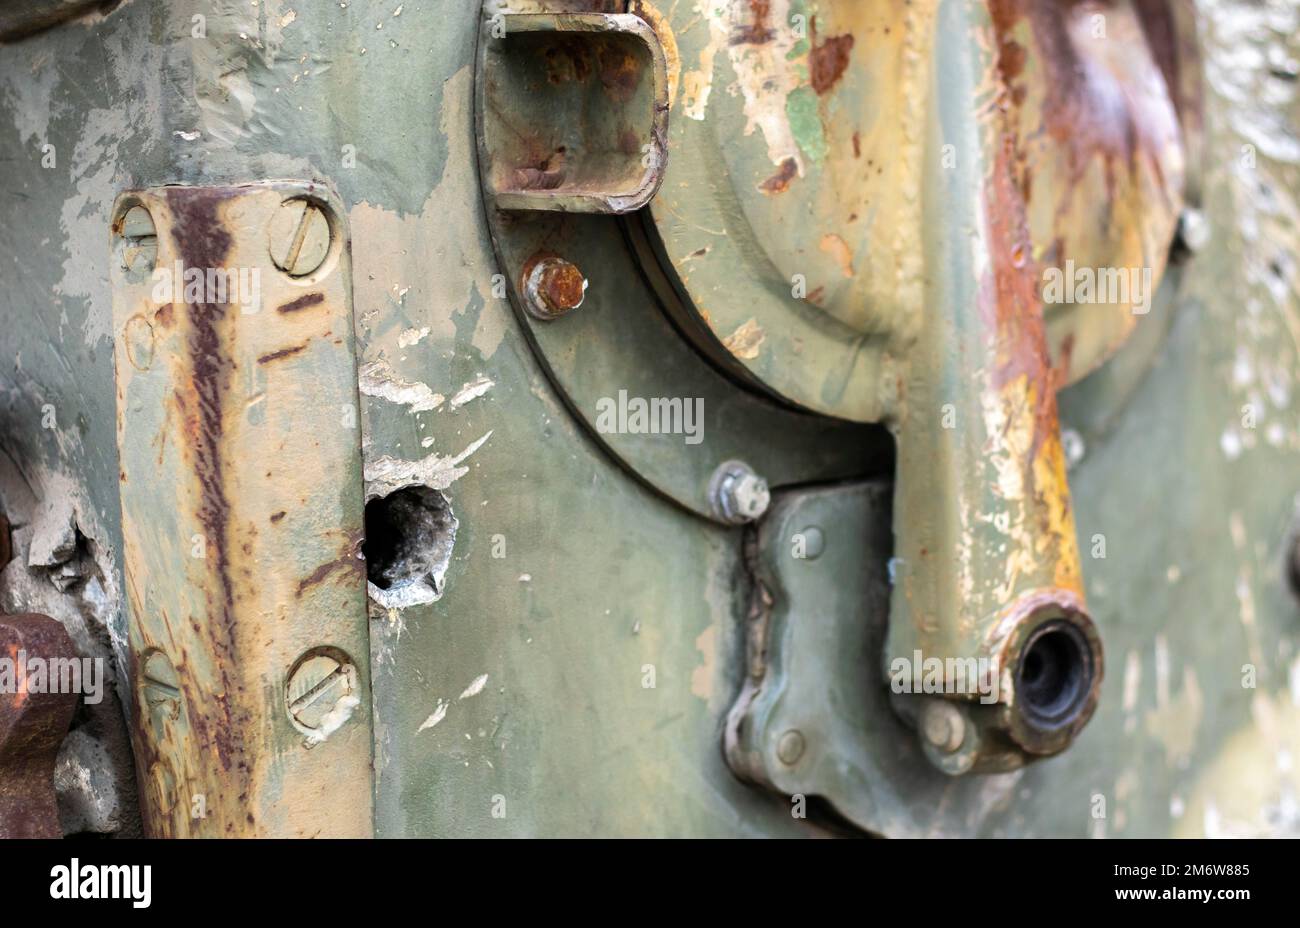 War in Ukraine, a hole in the armor of the BMP, pierced armor. Texture of green camouflage armored metal with damage and holes. Stock Photo